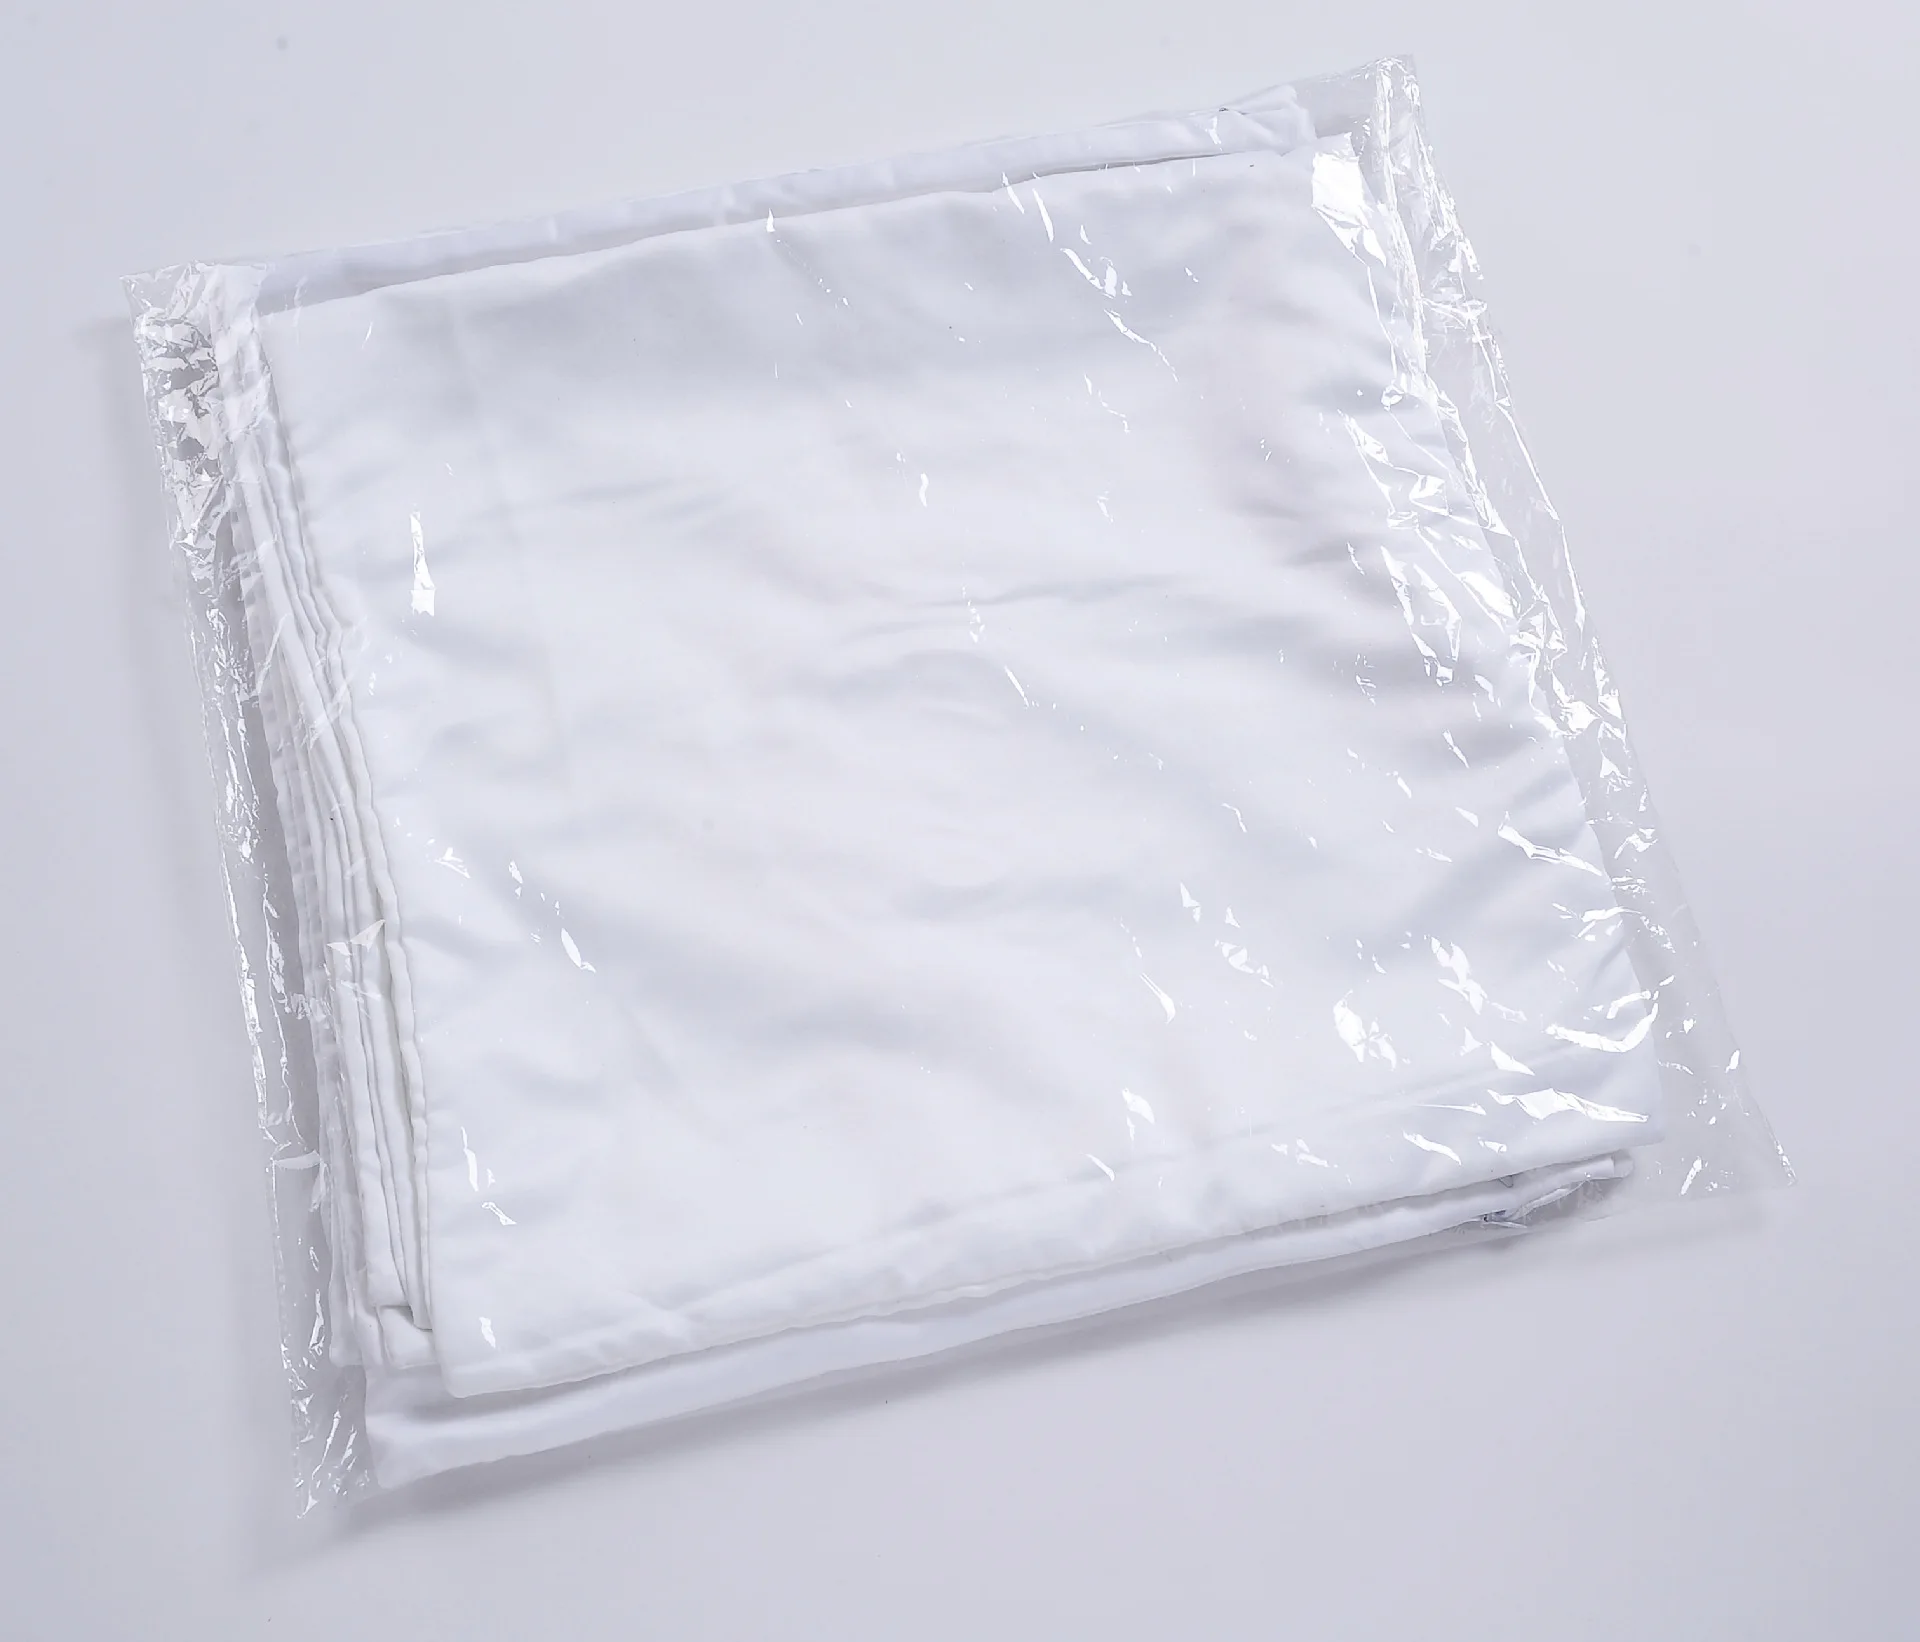 FREE SHIPPING 10pcs/lot 40x40cm Sublimation Blank pillowcase Polyester Peach Skin for Sublimation Transfer Printing DIY Gift free shipping 10pcs blank sublimation round metal plate ​​diy printing sublimation ink transfer paper